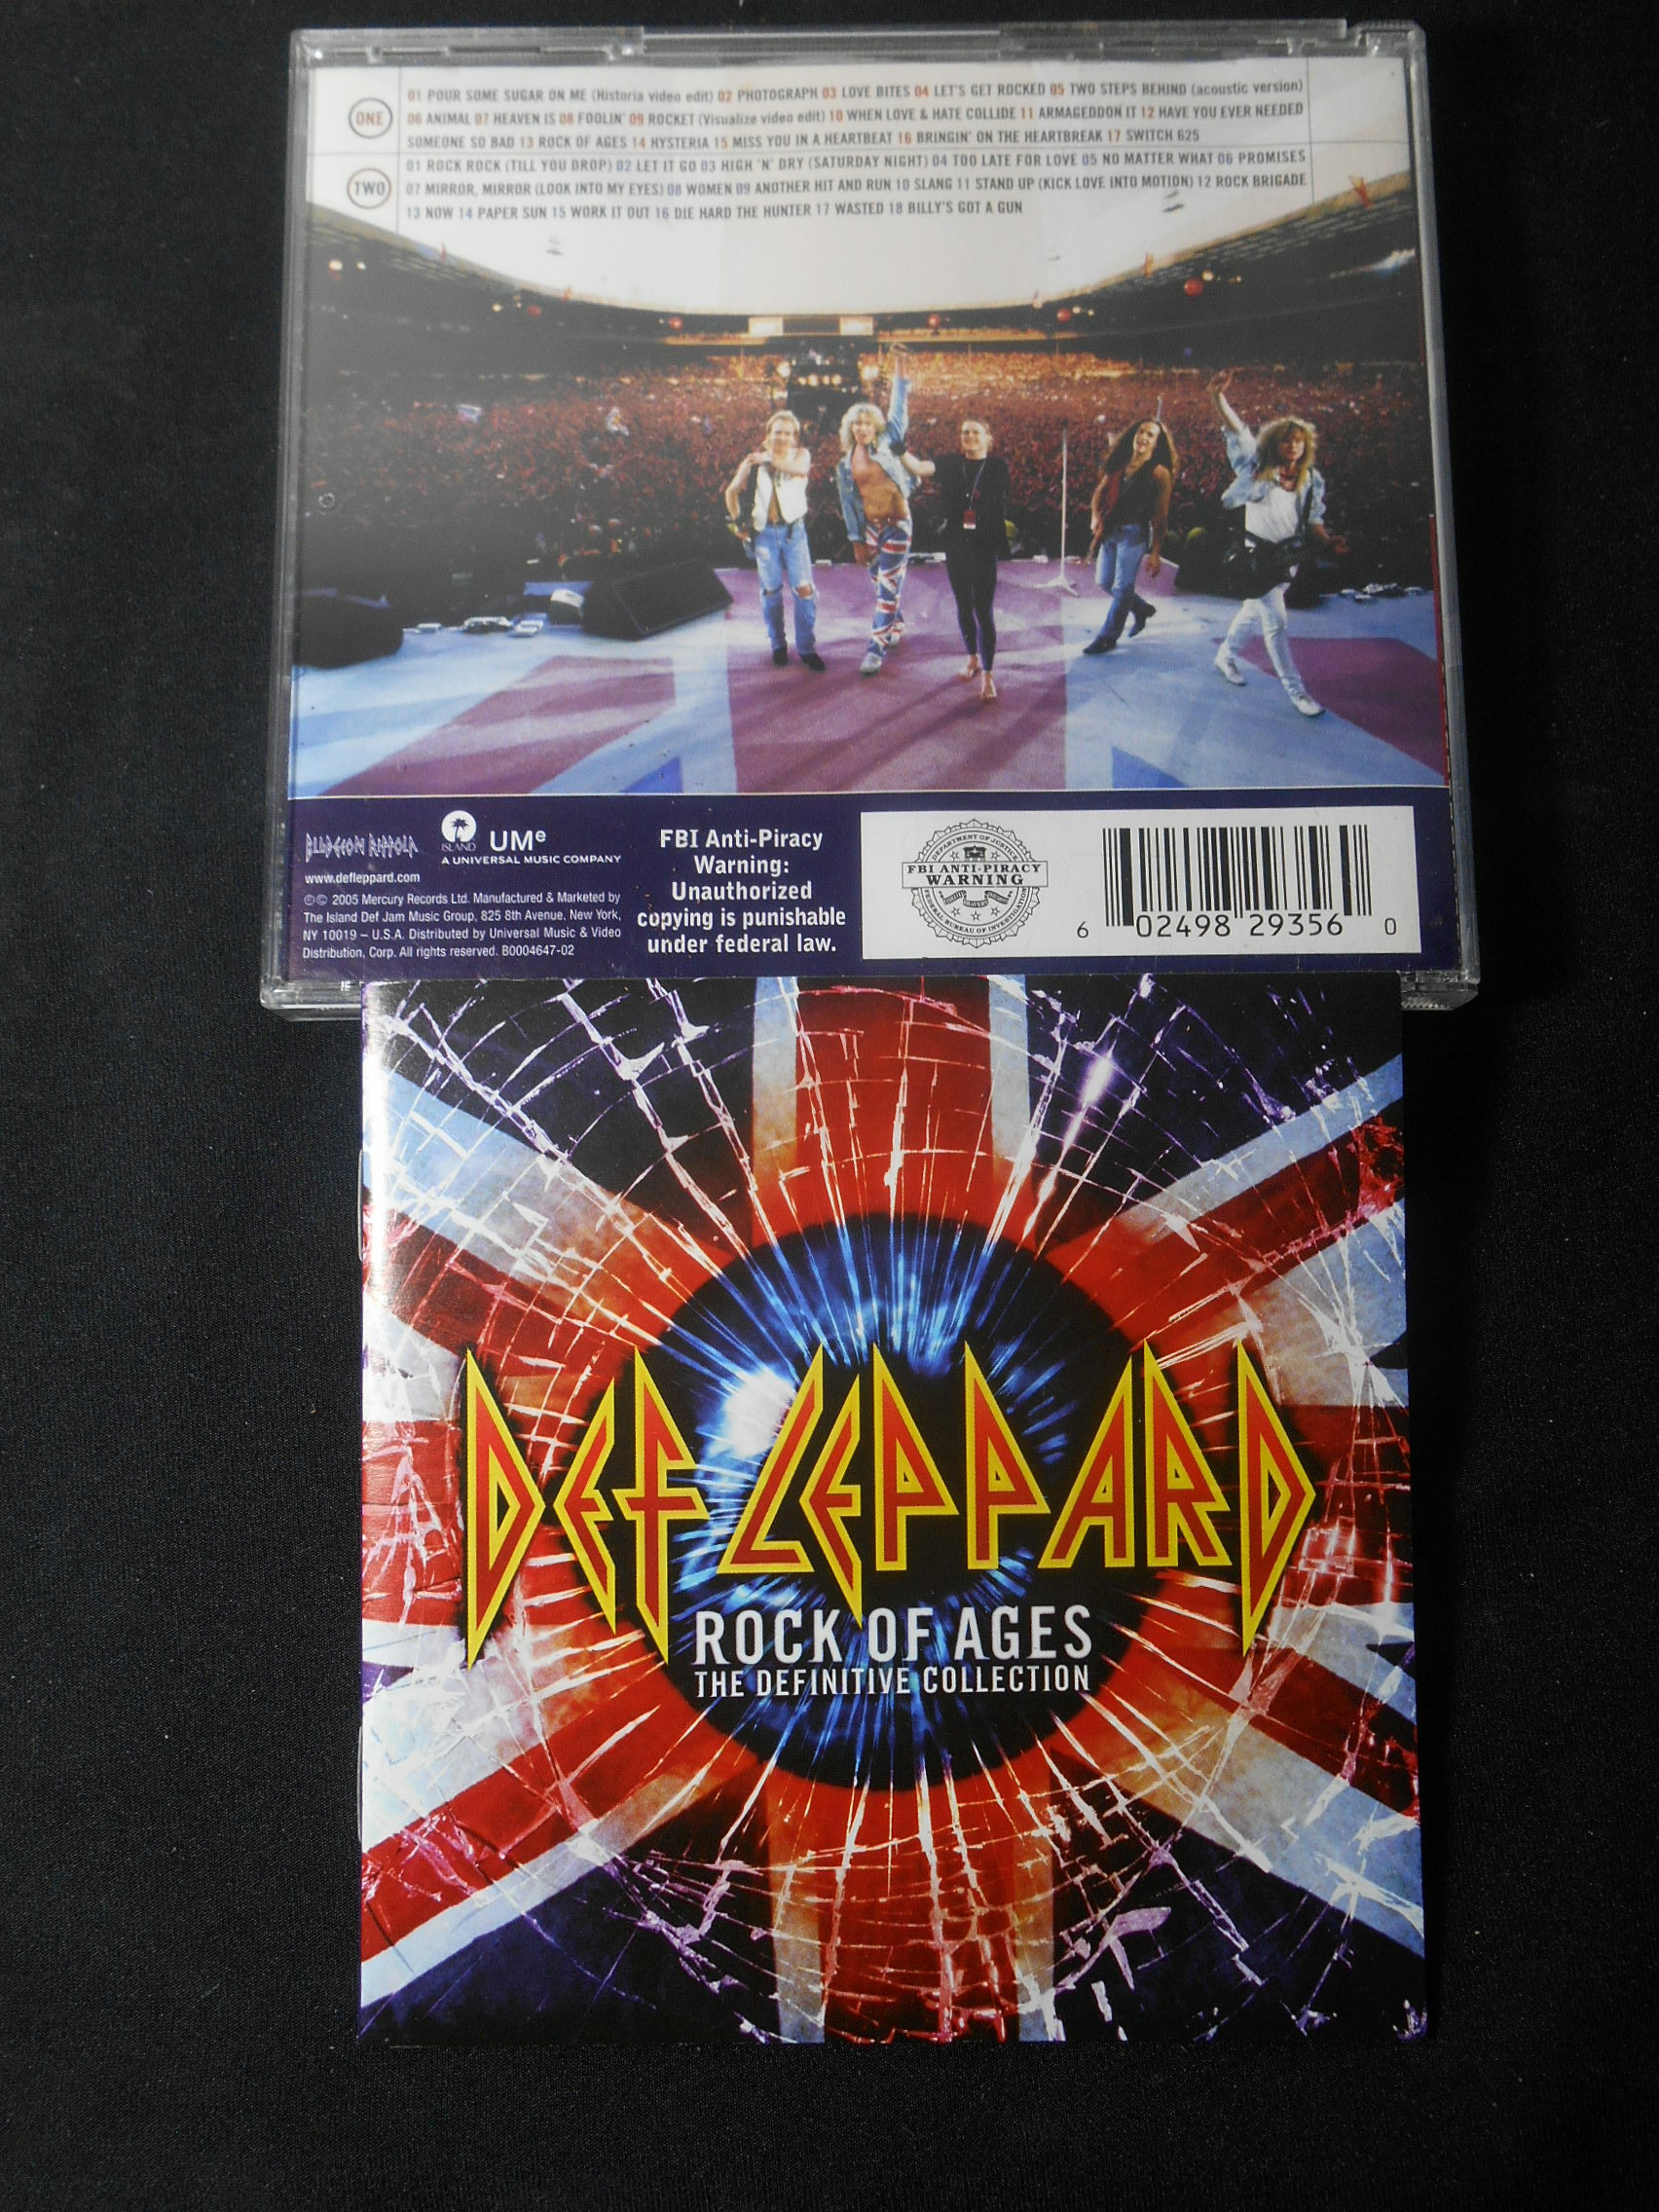 CD - Def Leppard - Rock of Ages the Definitive Collection (Duplo/USA)